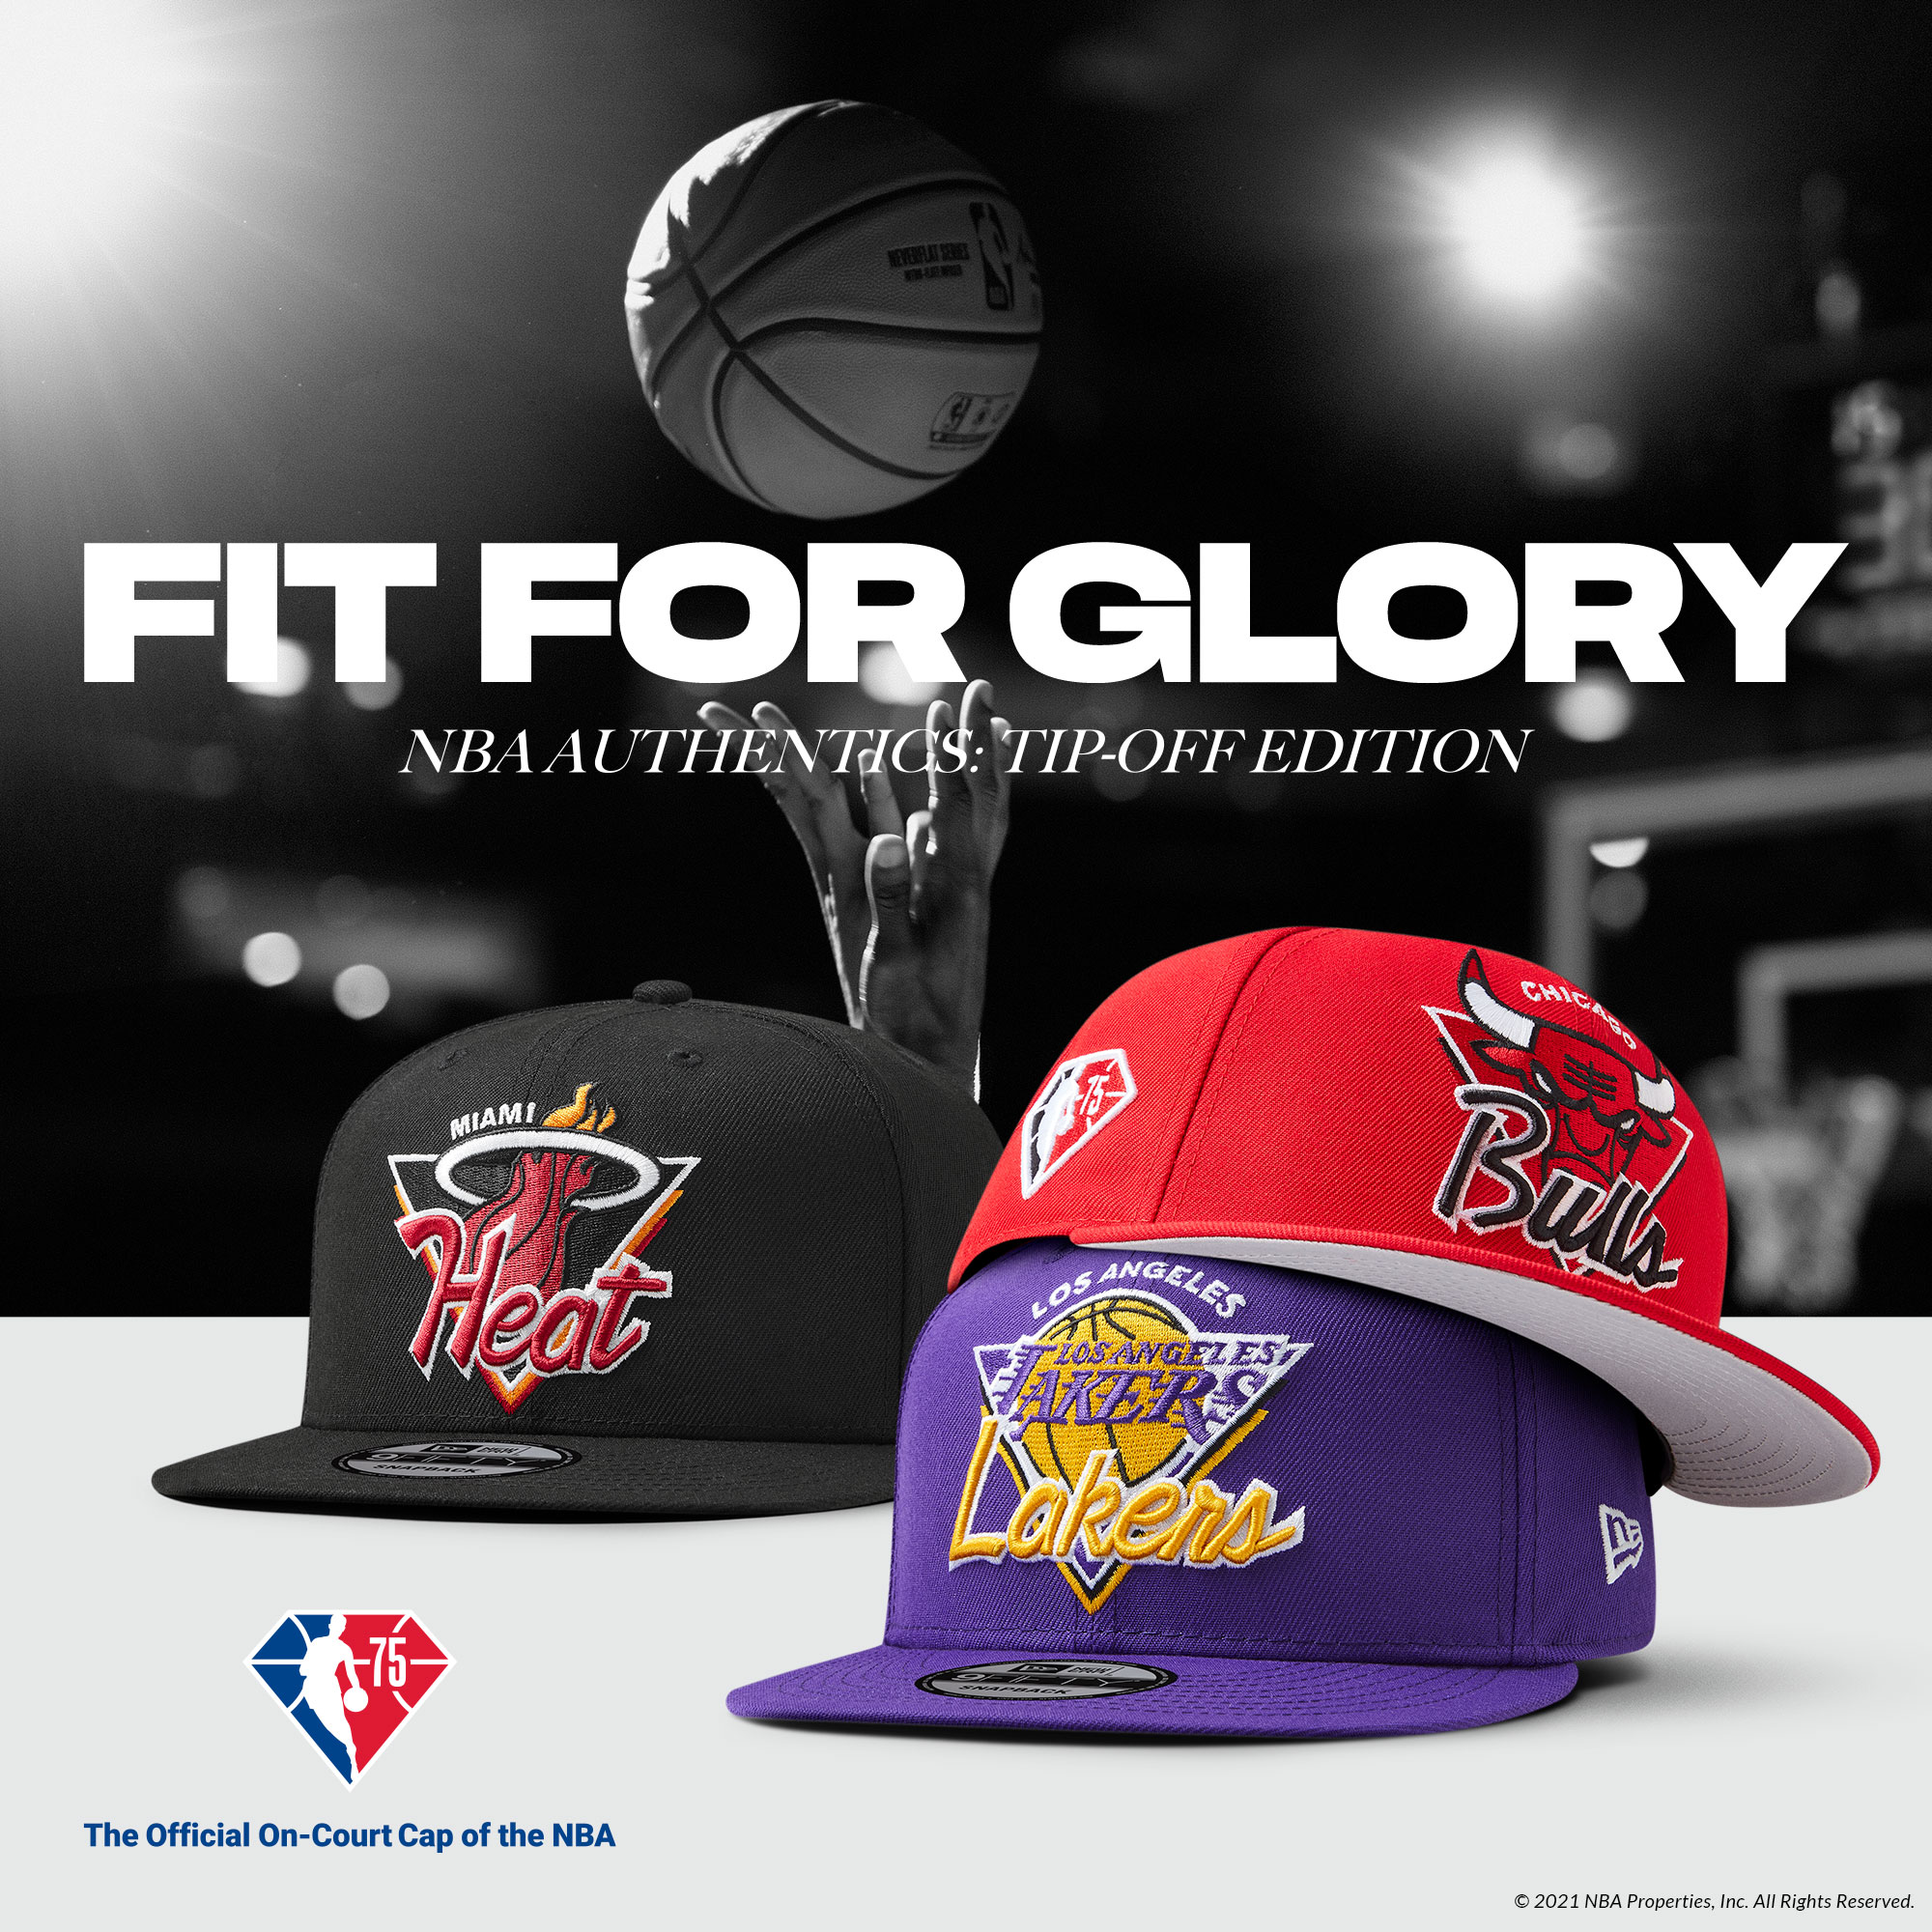 Experience winning moments while repping your favorite team in style. Shop  the NBA Statement Edition collection now at New Era Cap.